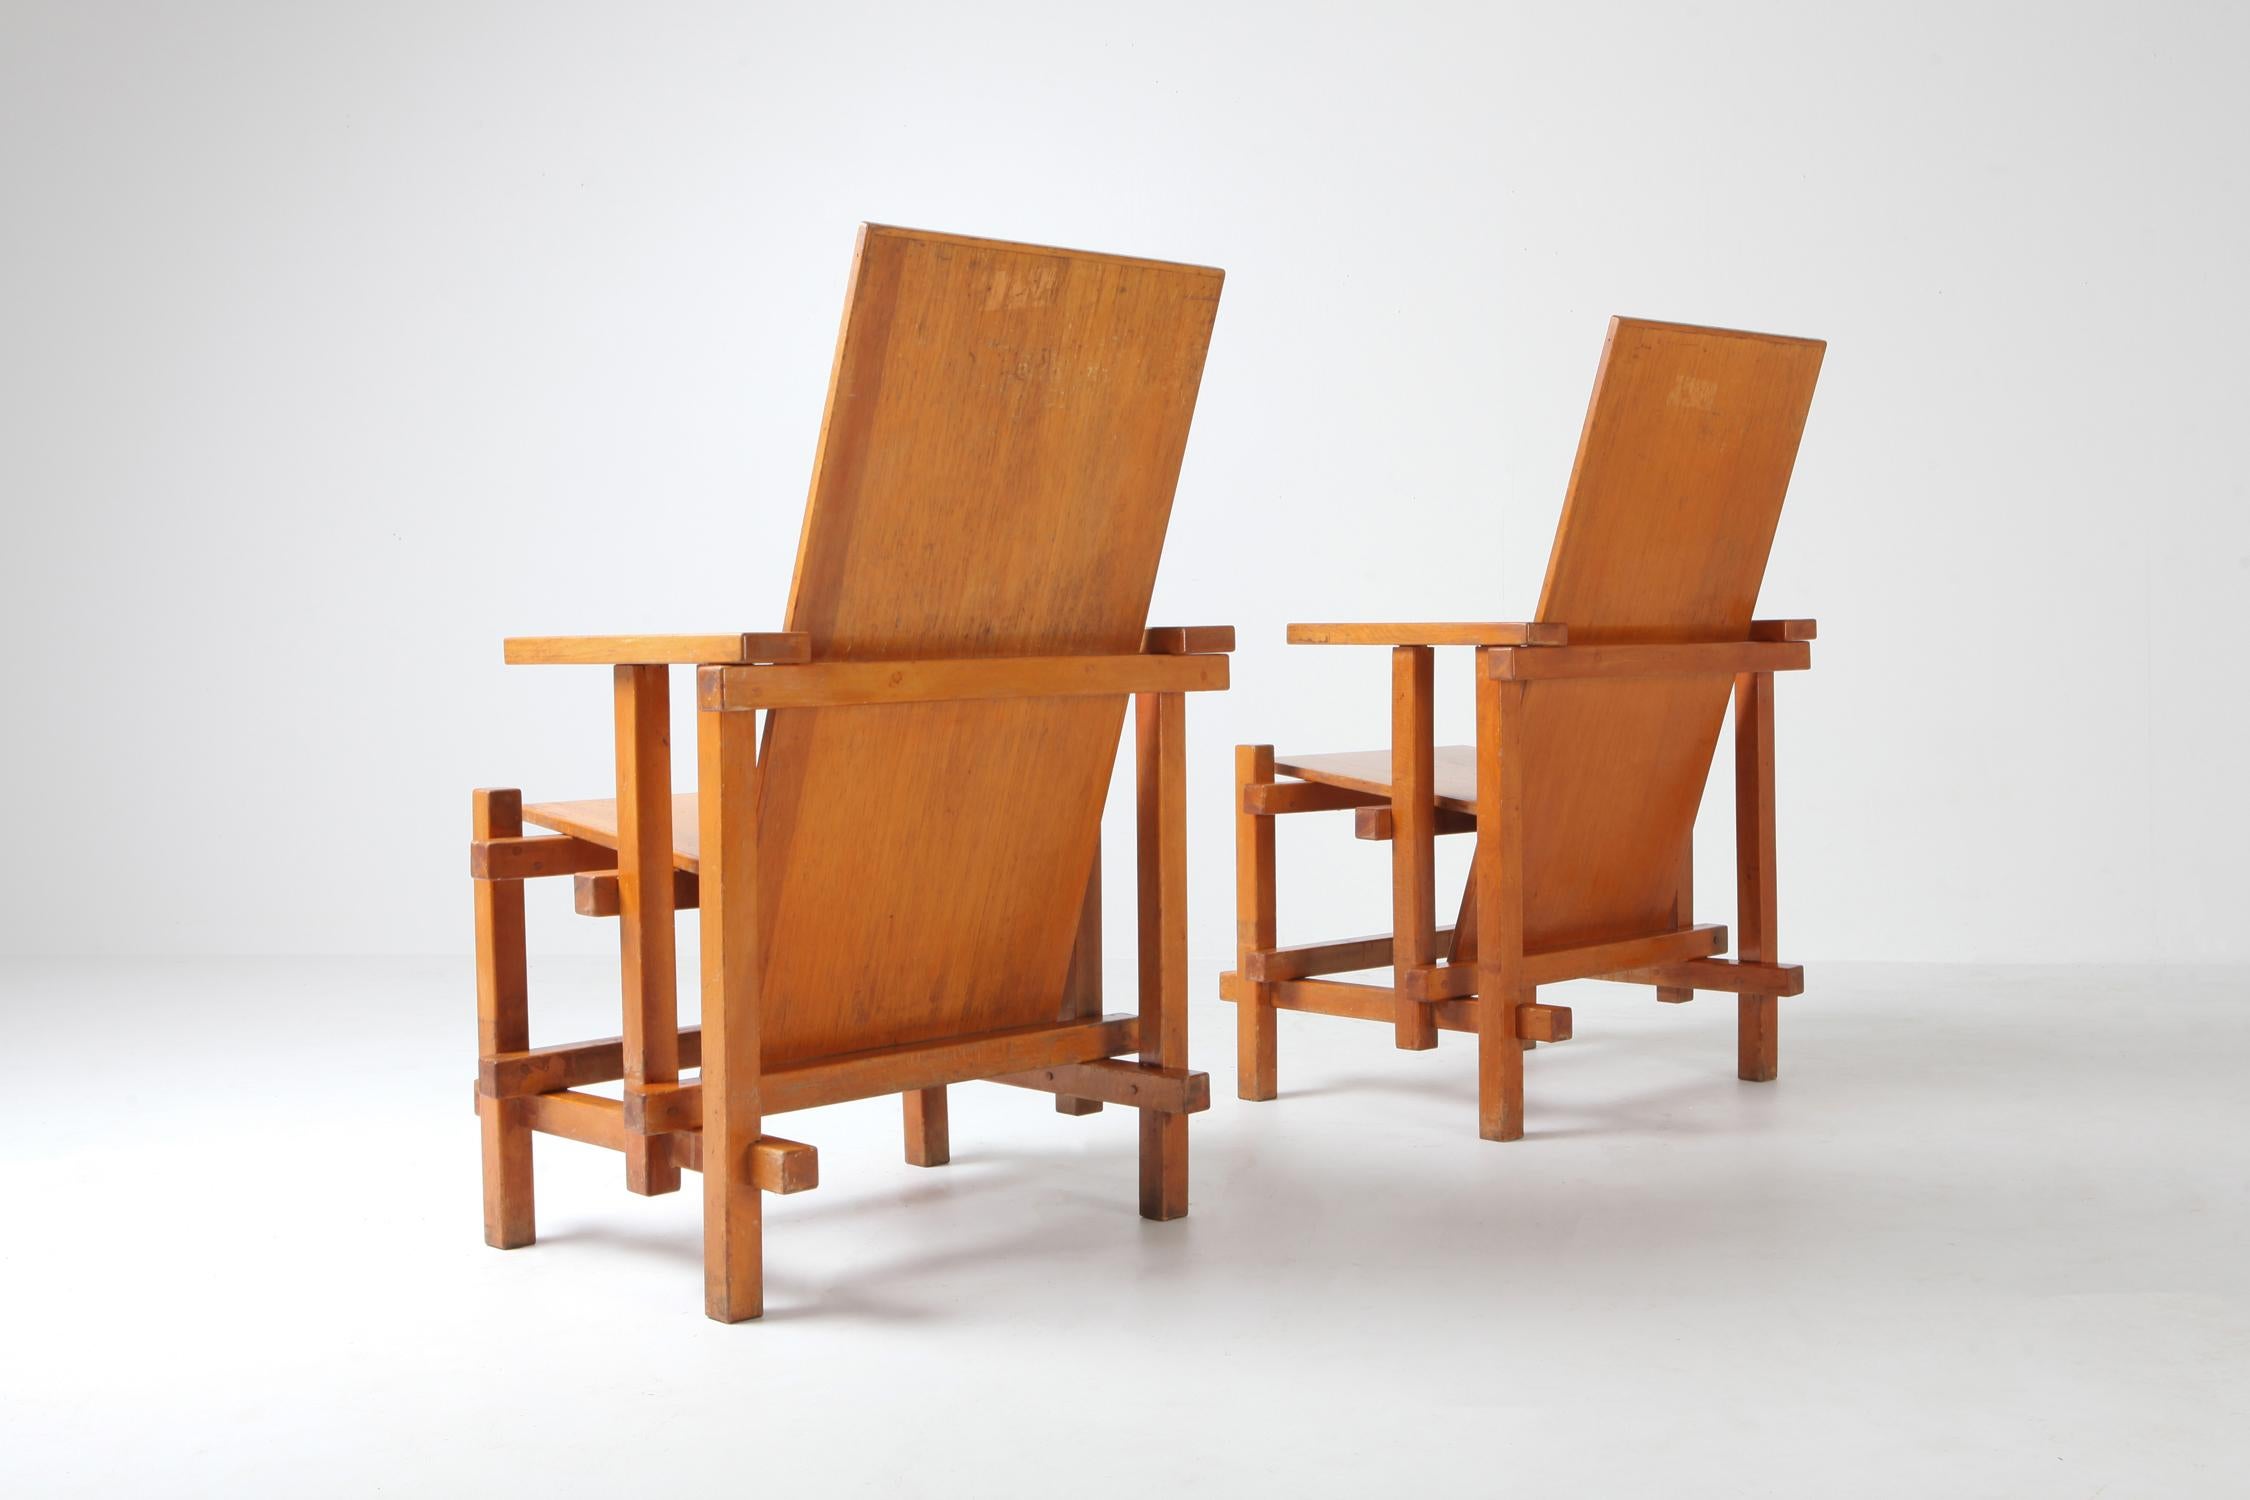 20th Century Modernist Armchairs Attributed to Gerrit Rietveld